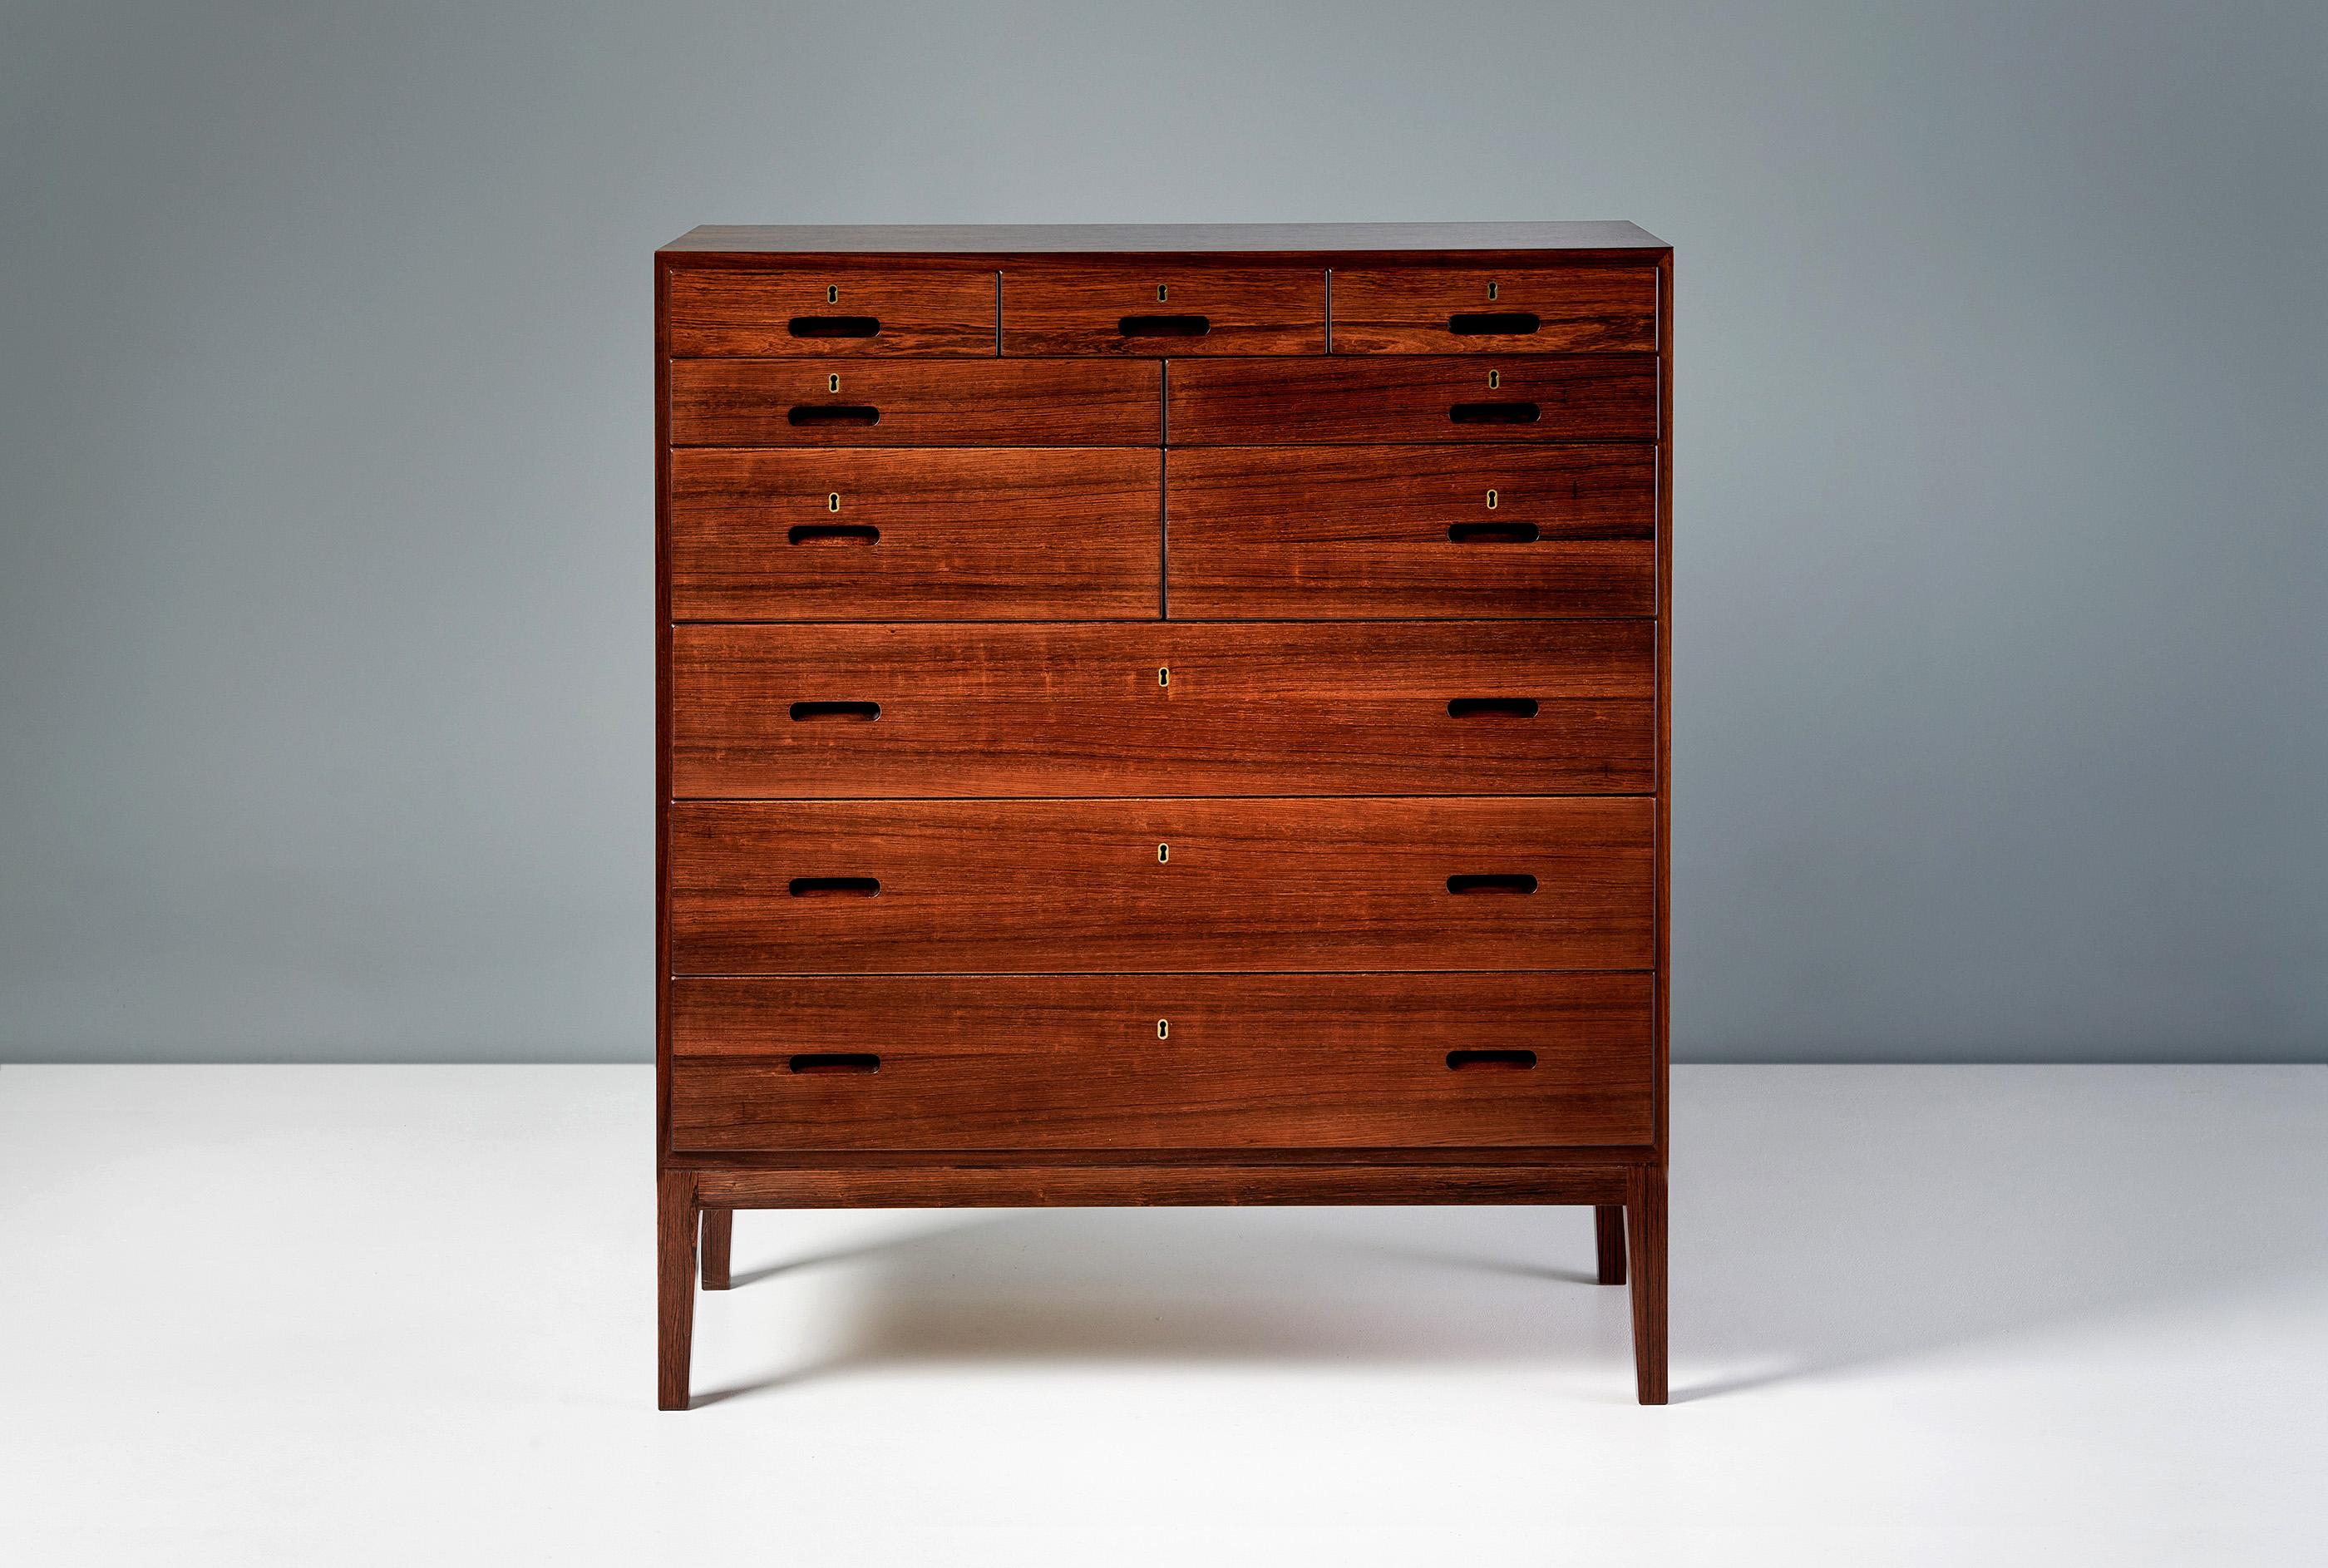 Kai Winding - Chest of Drawers, c1950s

Tall chest of drawers from Danish designer Kai Winding produced in the 1950s. The chest features mahogany lined drawers of varying sizes with solid rosewood drawer fronts and base. Each drawer is lockable.